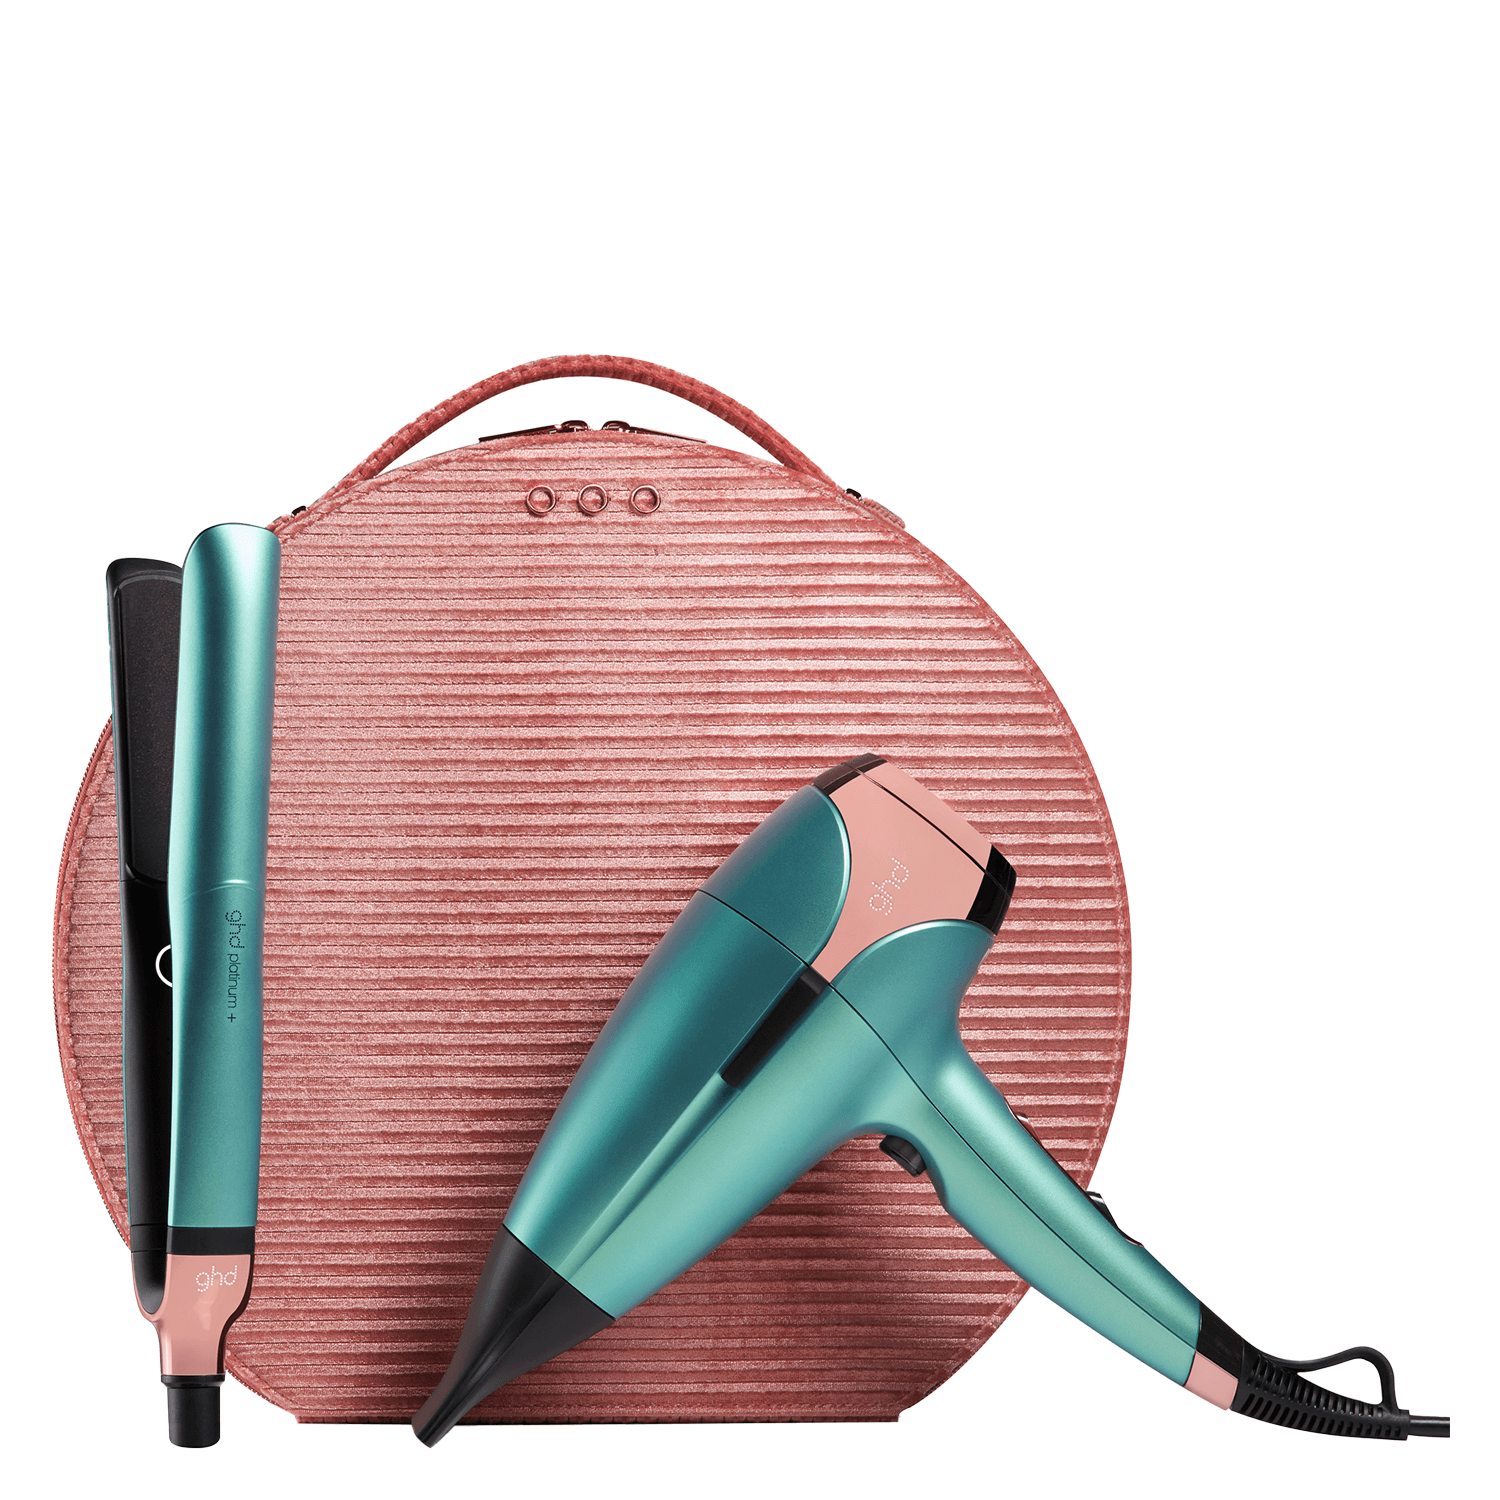 Product image from ghd tools - Dreamland Collection Le Deluxe Set